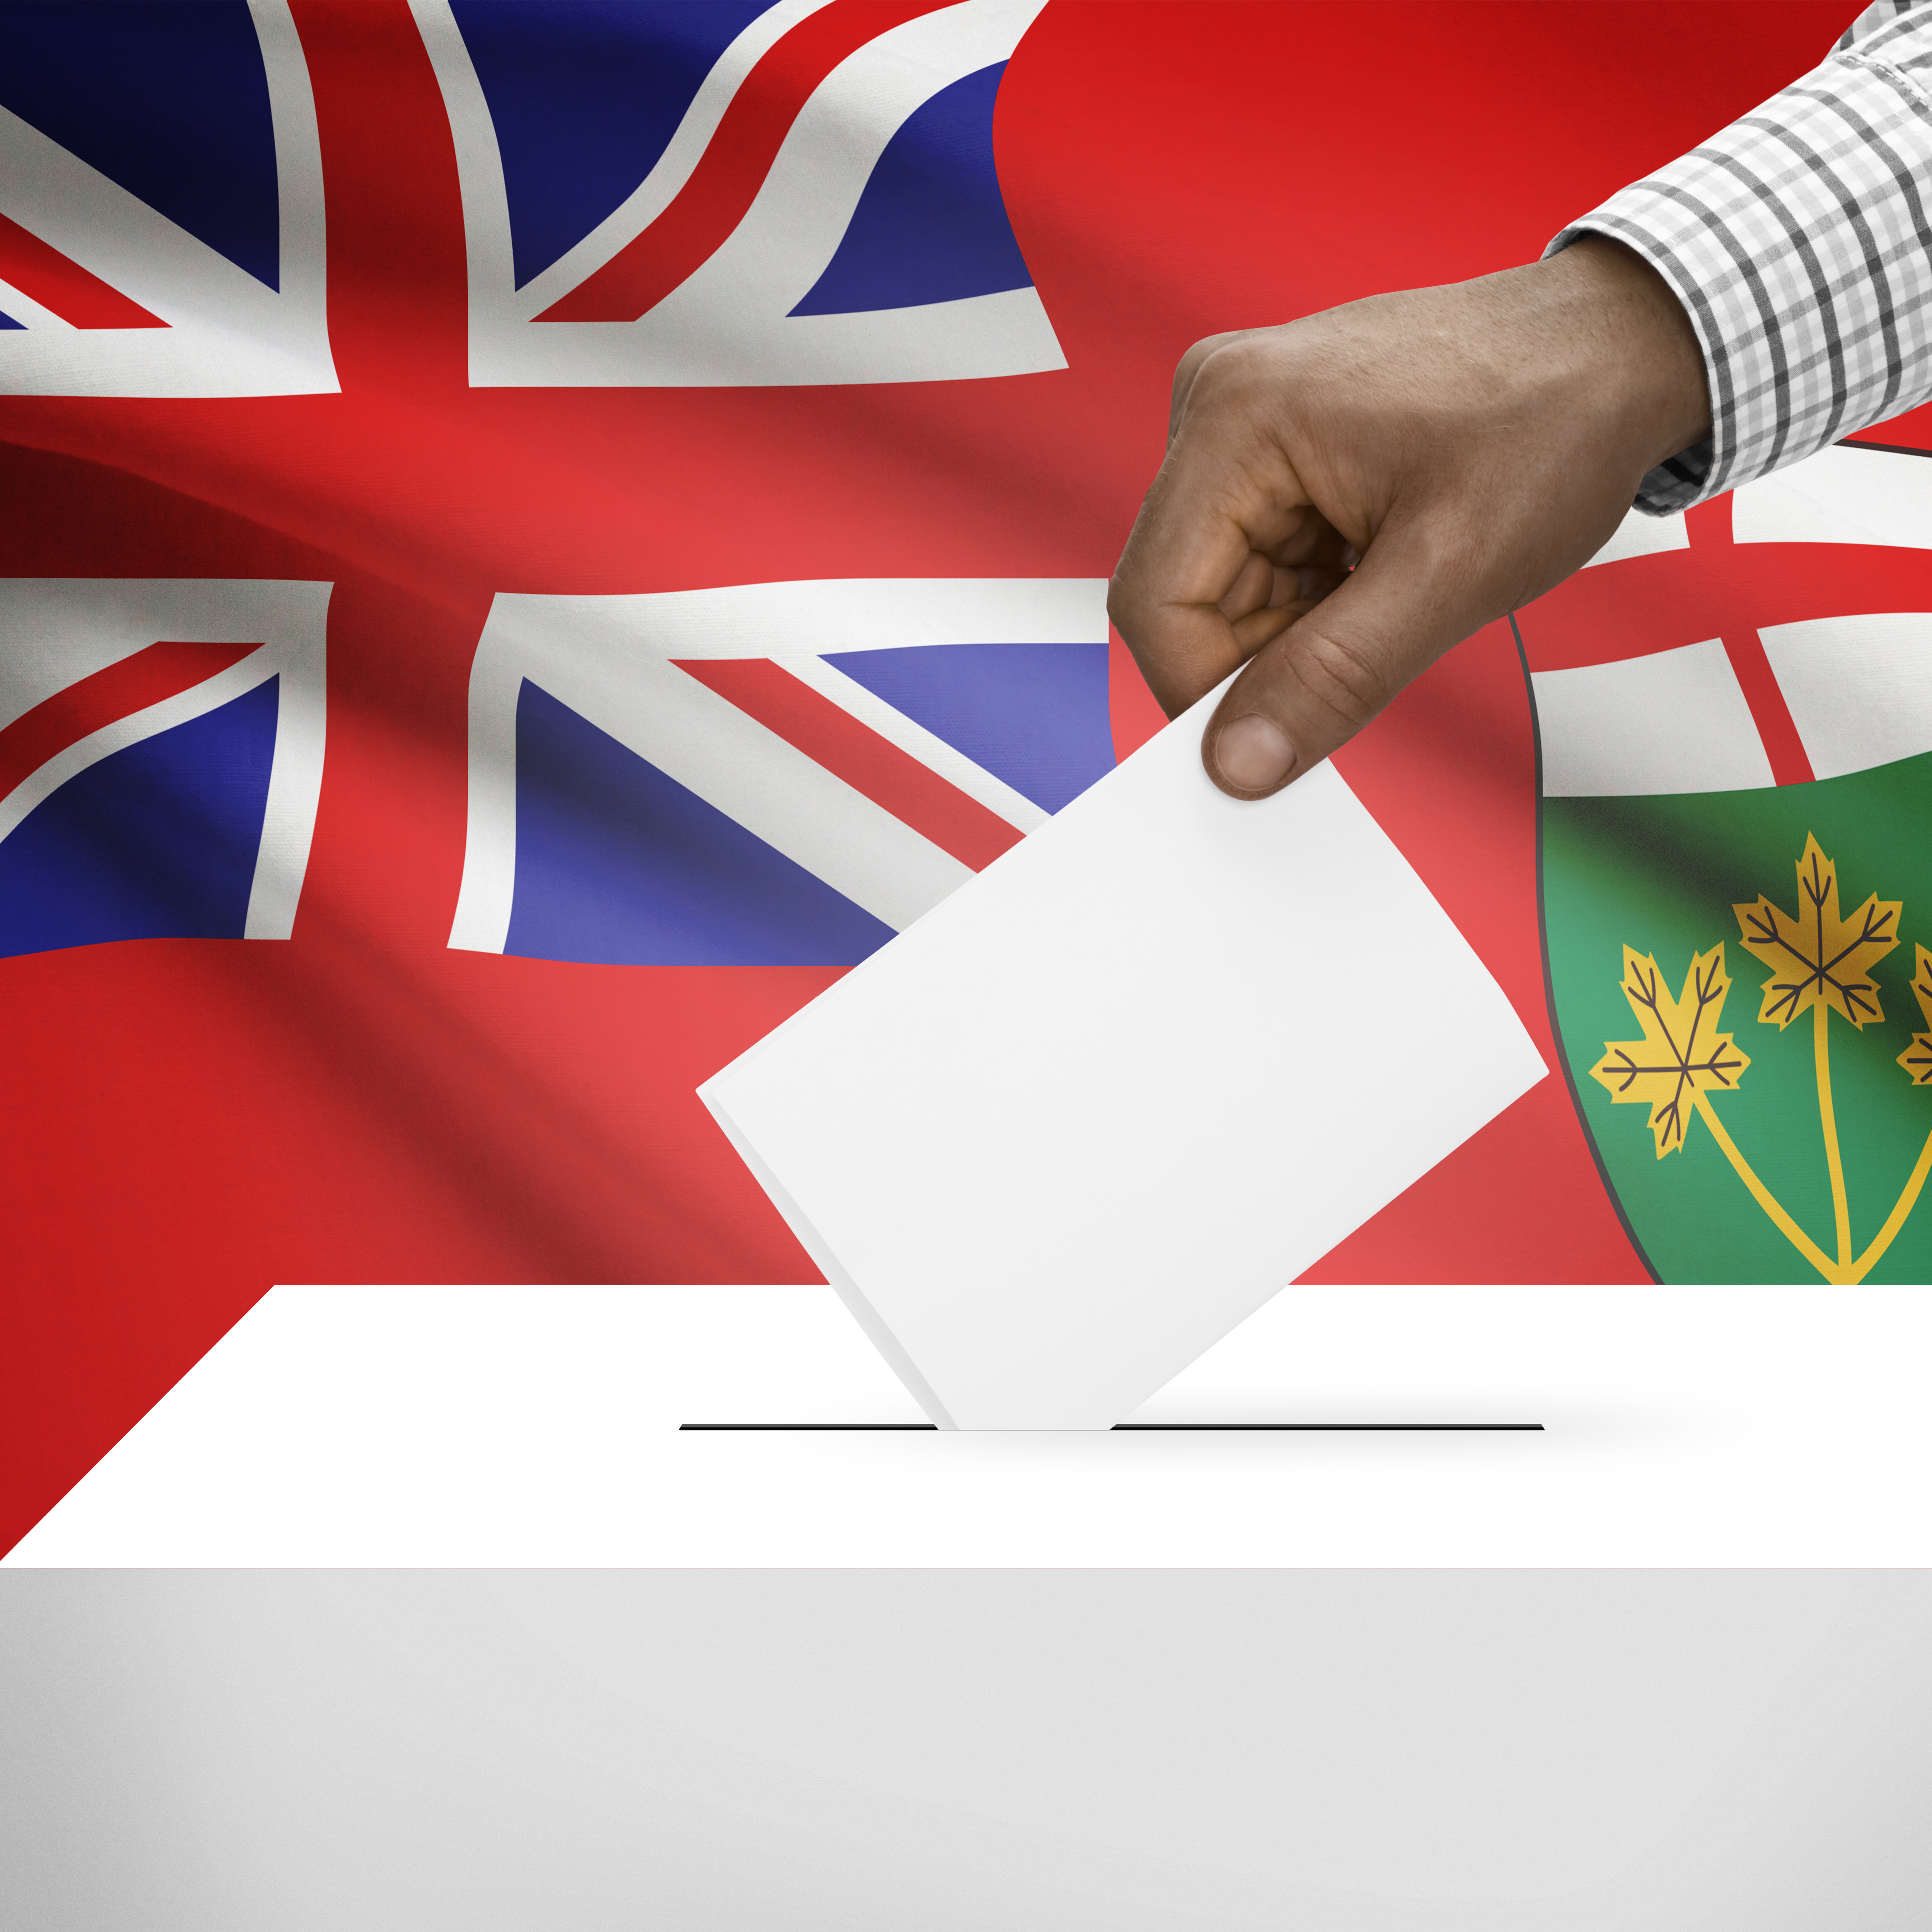 Ontario voter’s longing for the ease of Rukungiri